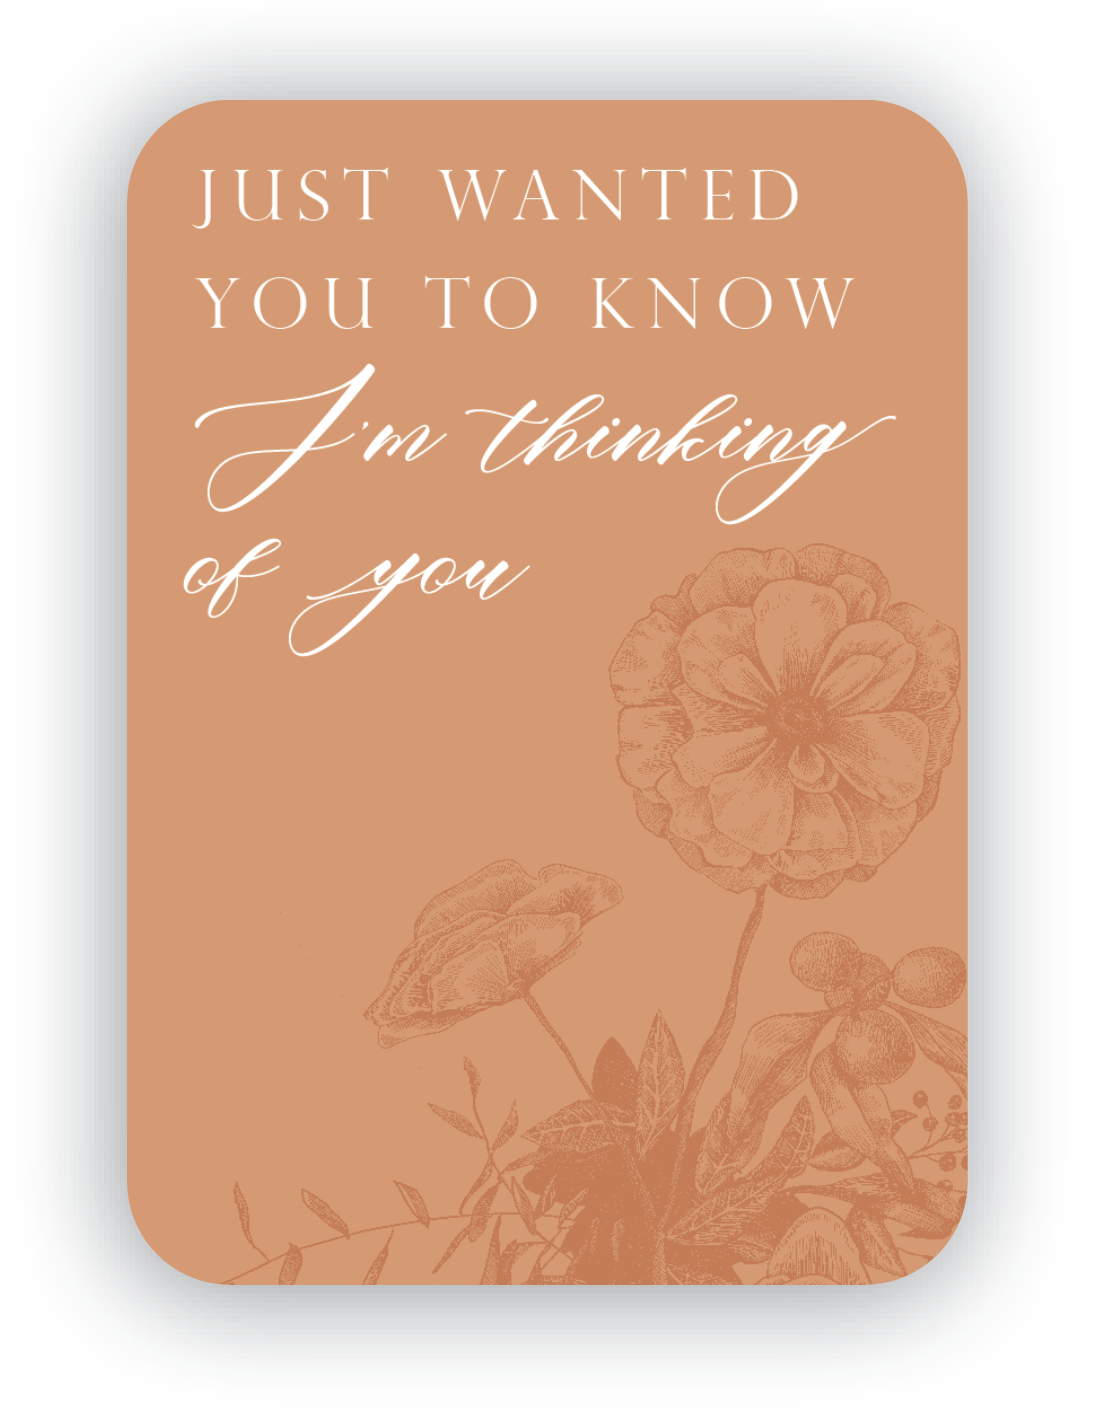 Digital dusty orange mini card with florals that says "Just wanted you to know I'm thinking of you" by Rust Belt Love